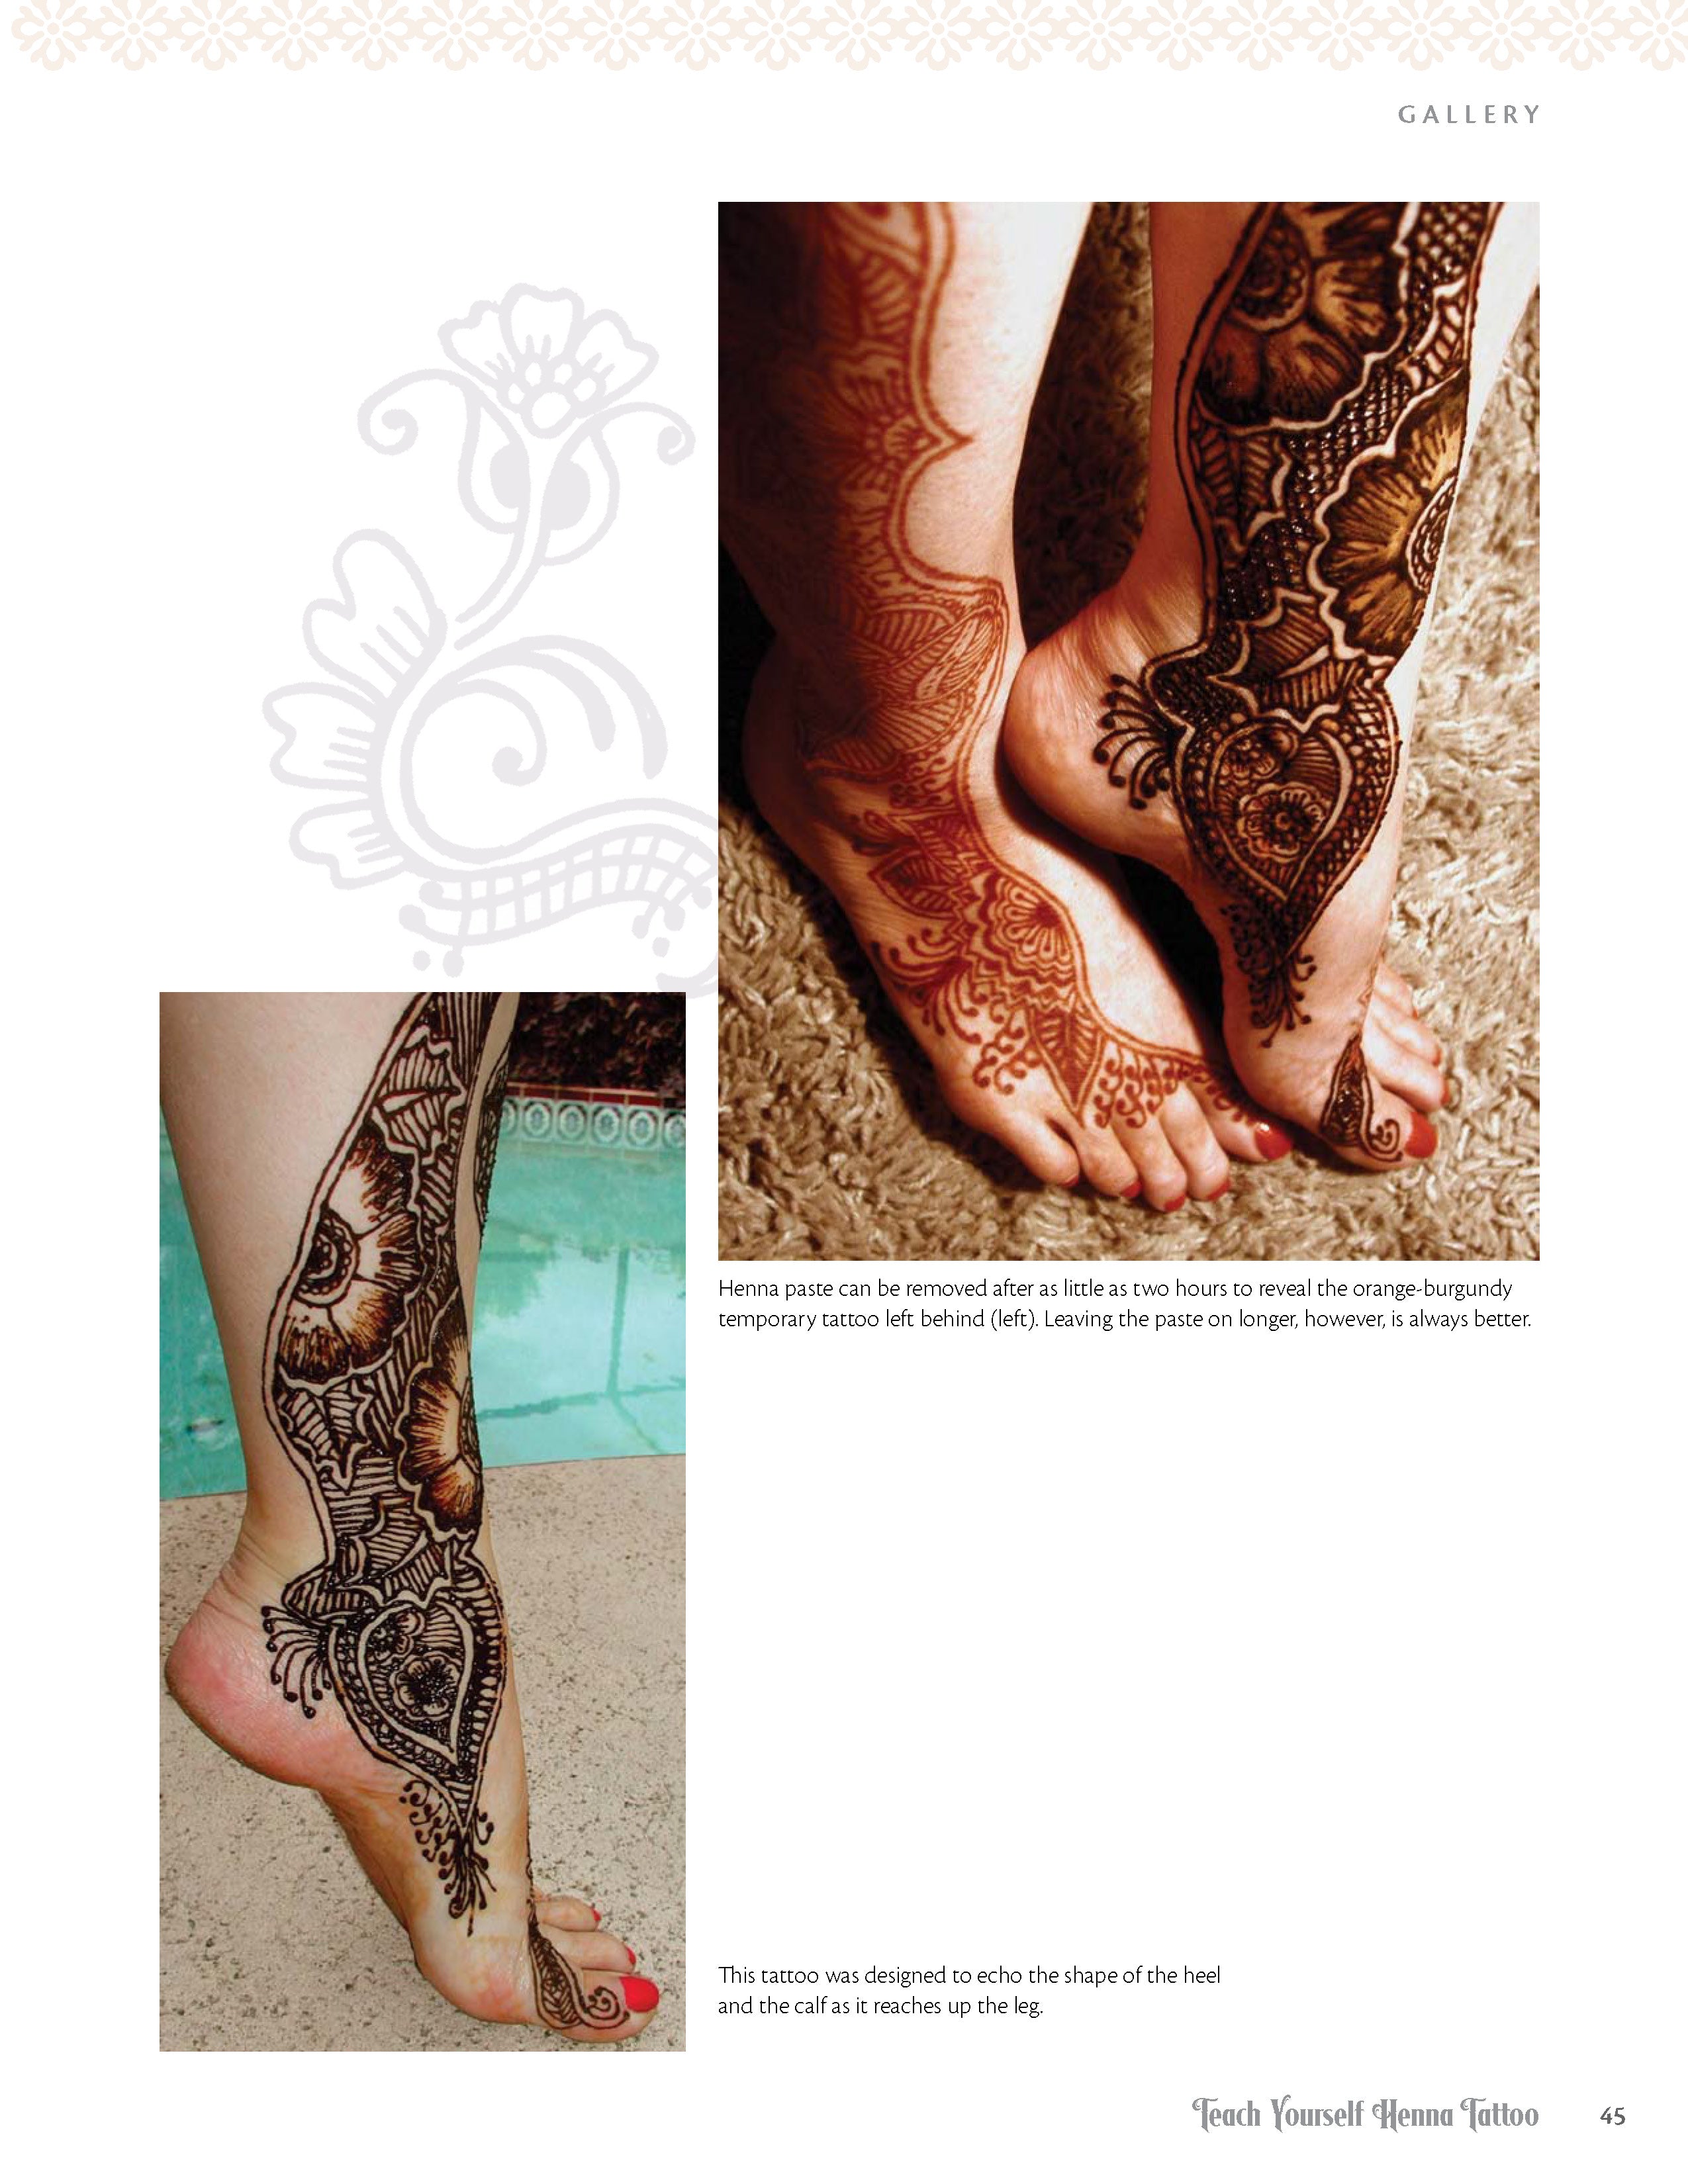 Cute Girlish Butterfly Henna Tattoo For Foot😍||By HennArchy|| - YouTube